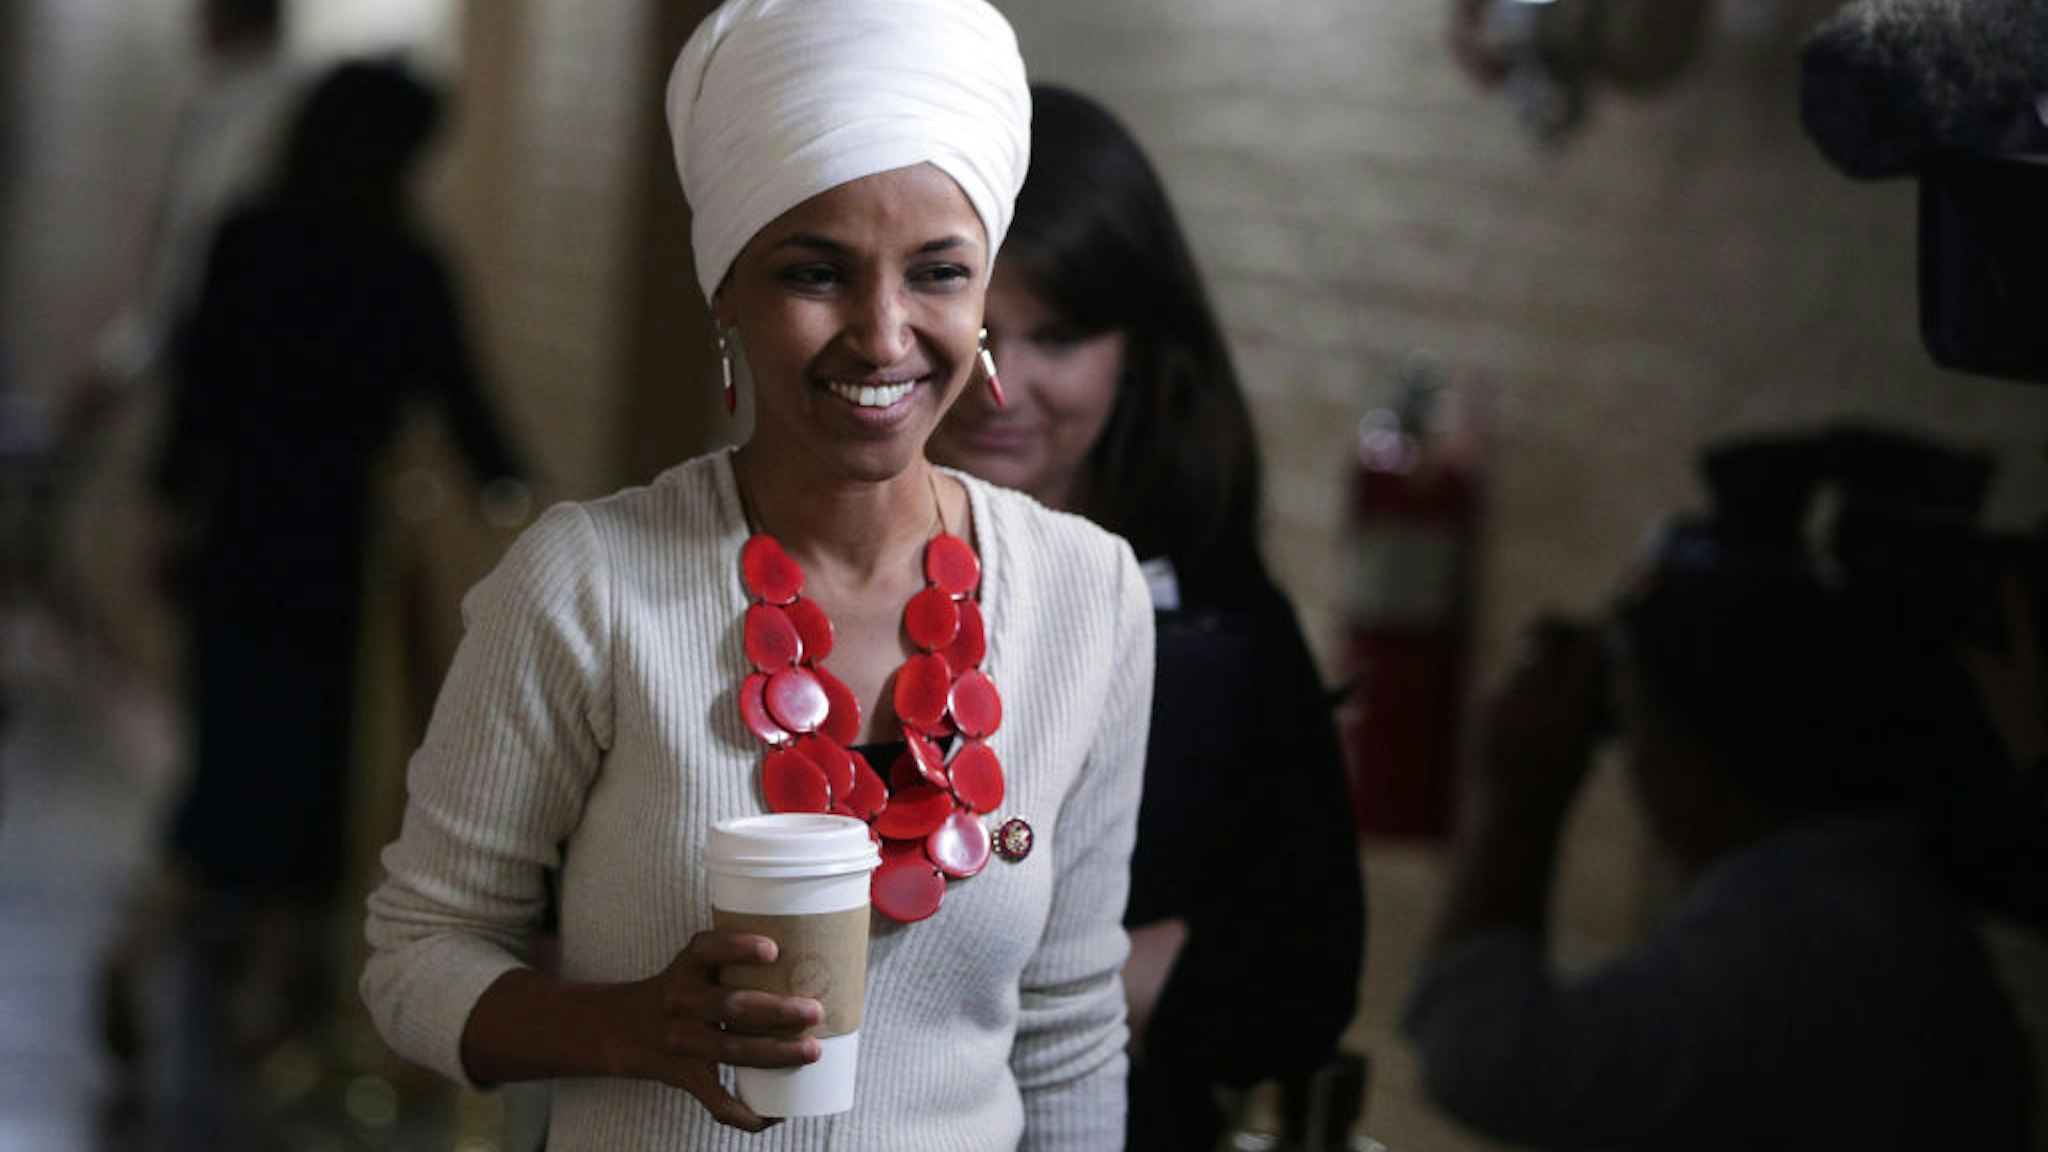 Rep. Ilhan Omar arrives at a House Democratic Caucus meeting at the U.S. Capitol September 25, 2019